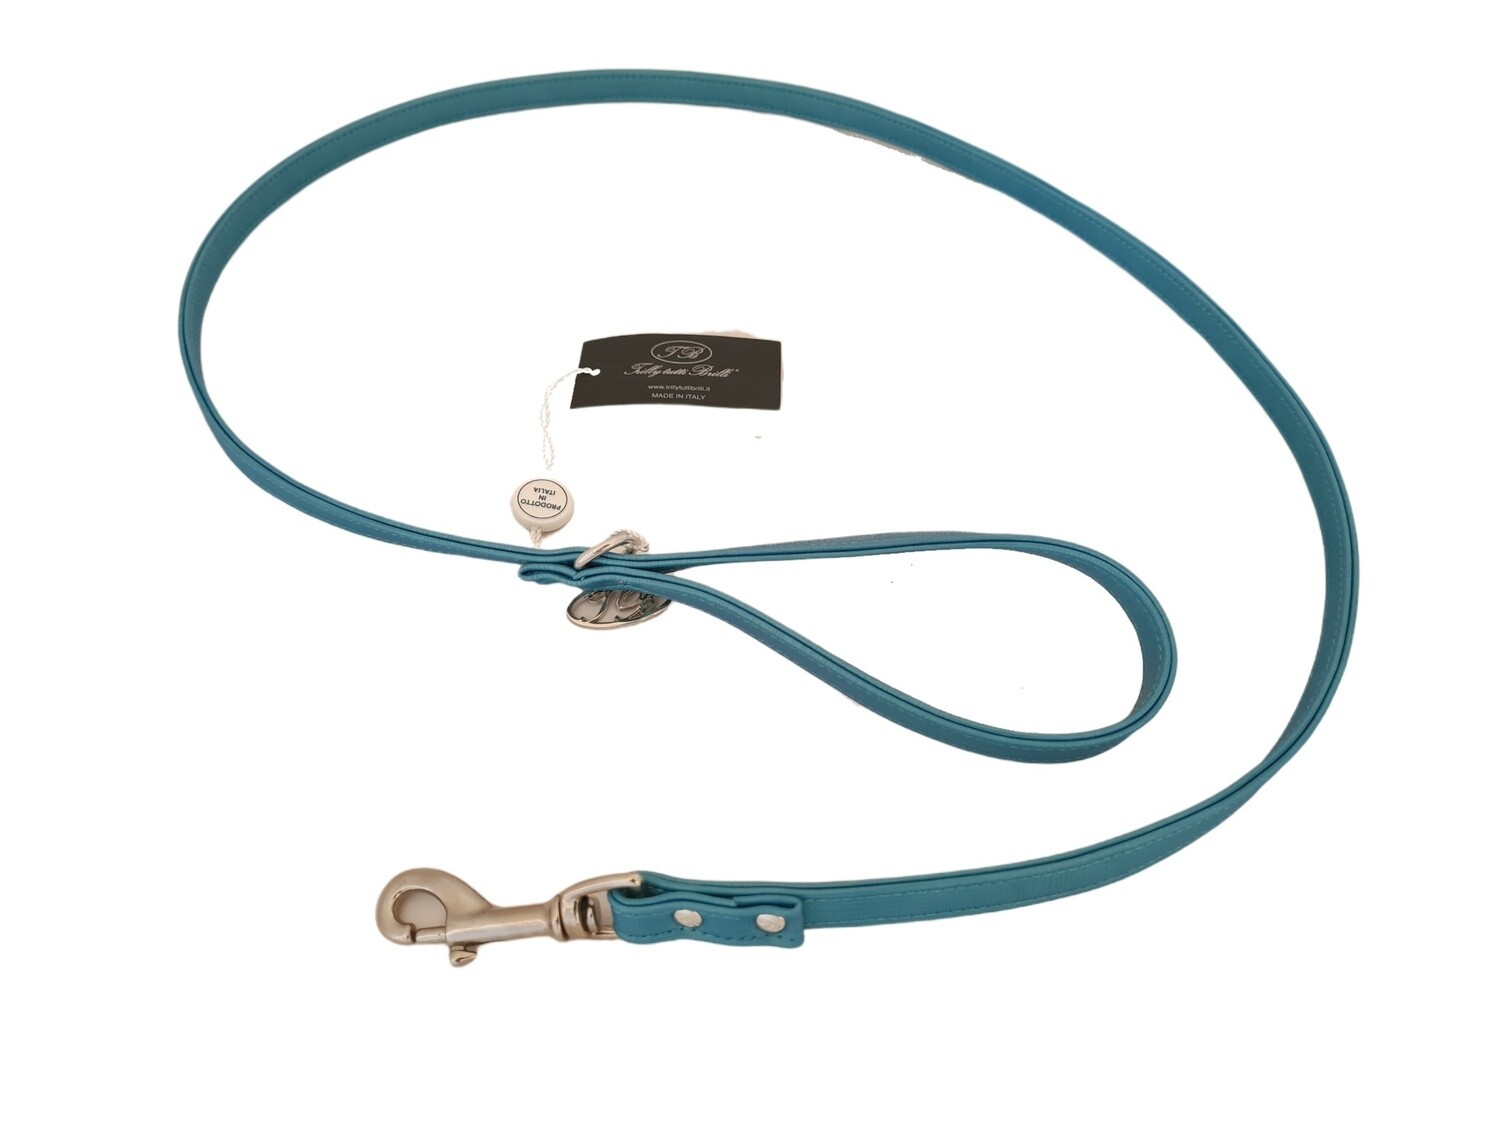 Lione Leash Trilly 31 Petroleum color in relief - Stock